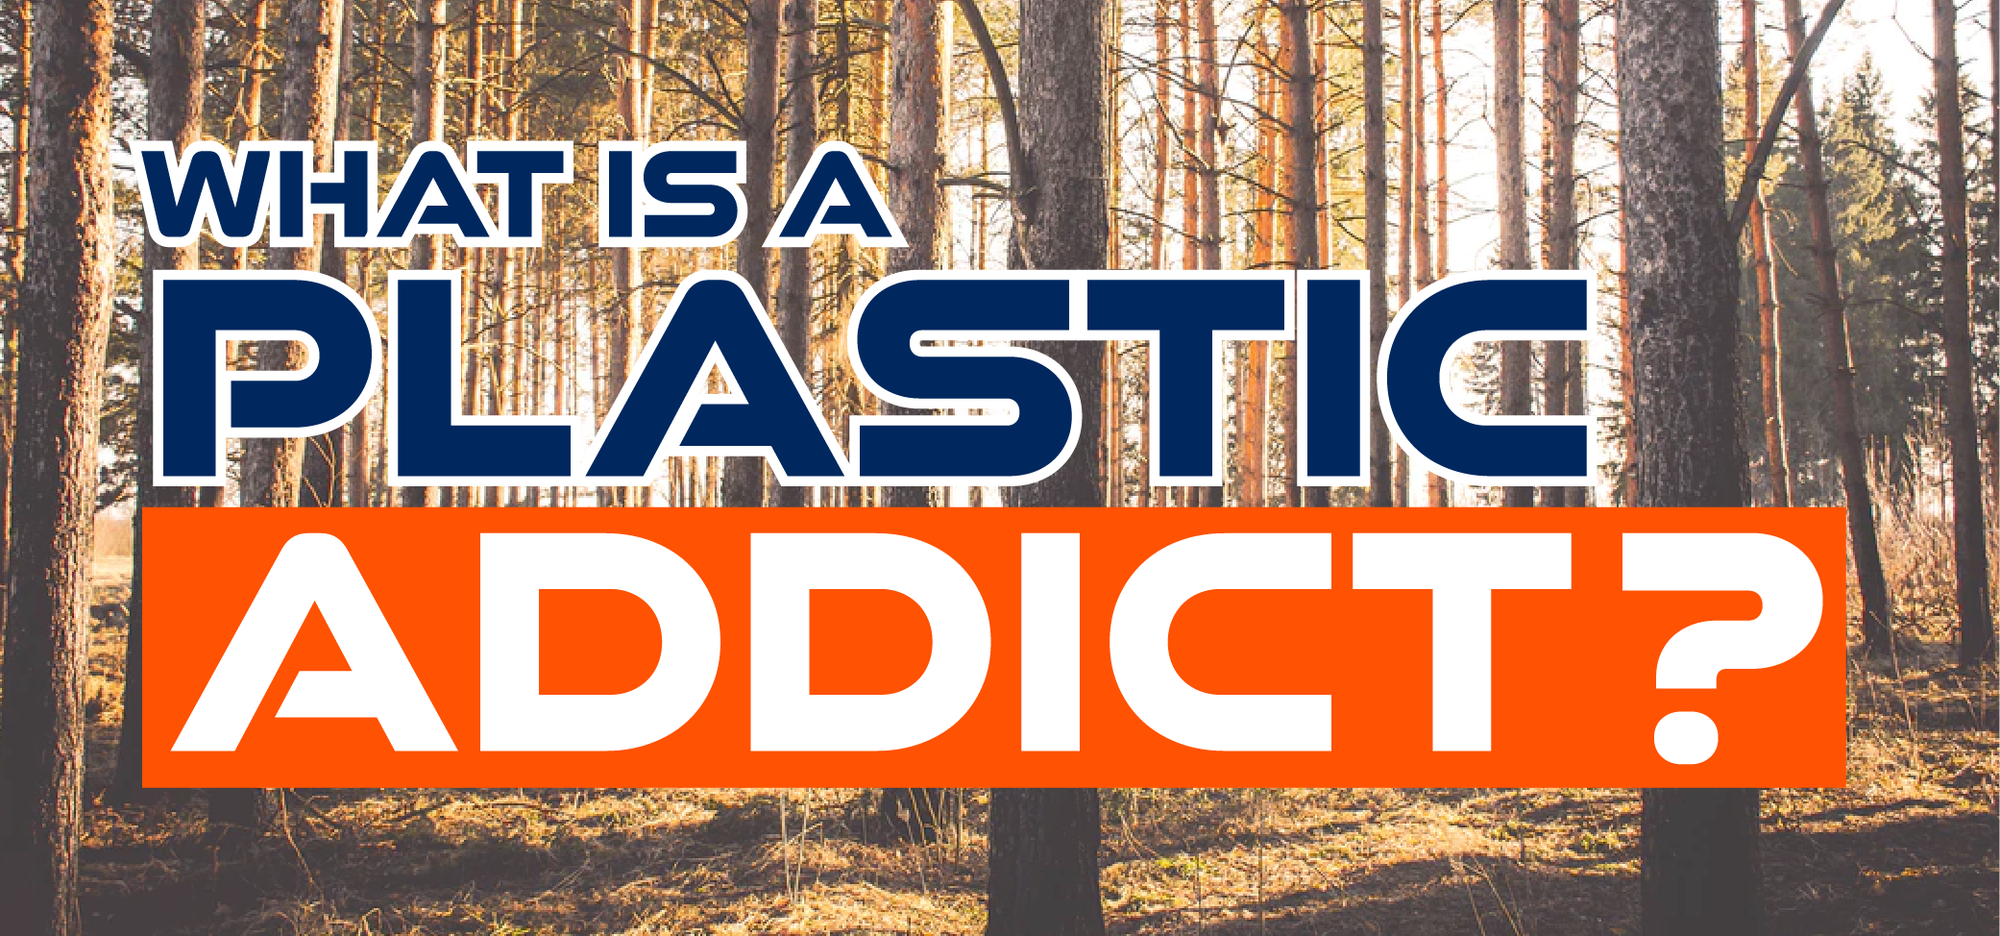 What is a plastic addict? Throw it, catch it, recycle it!